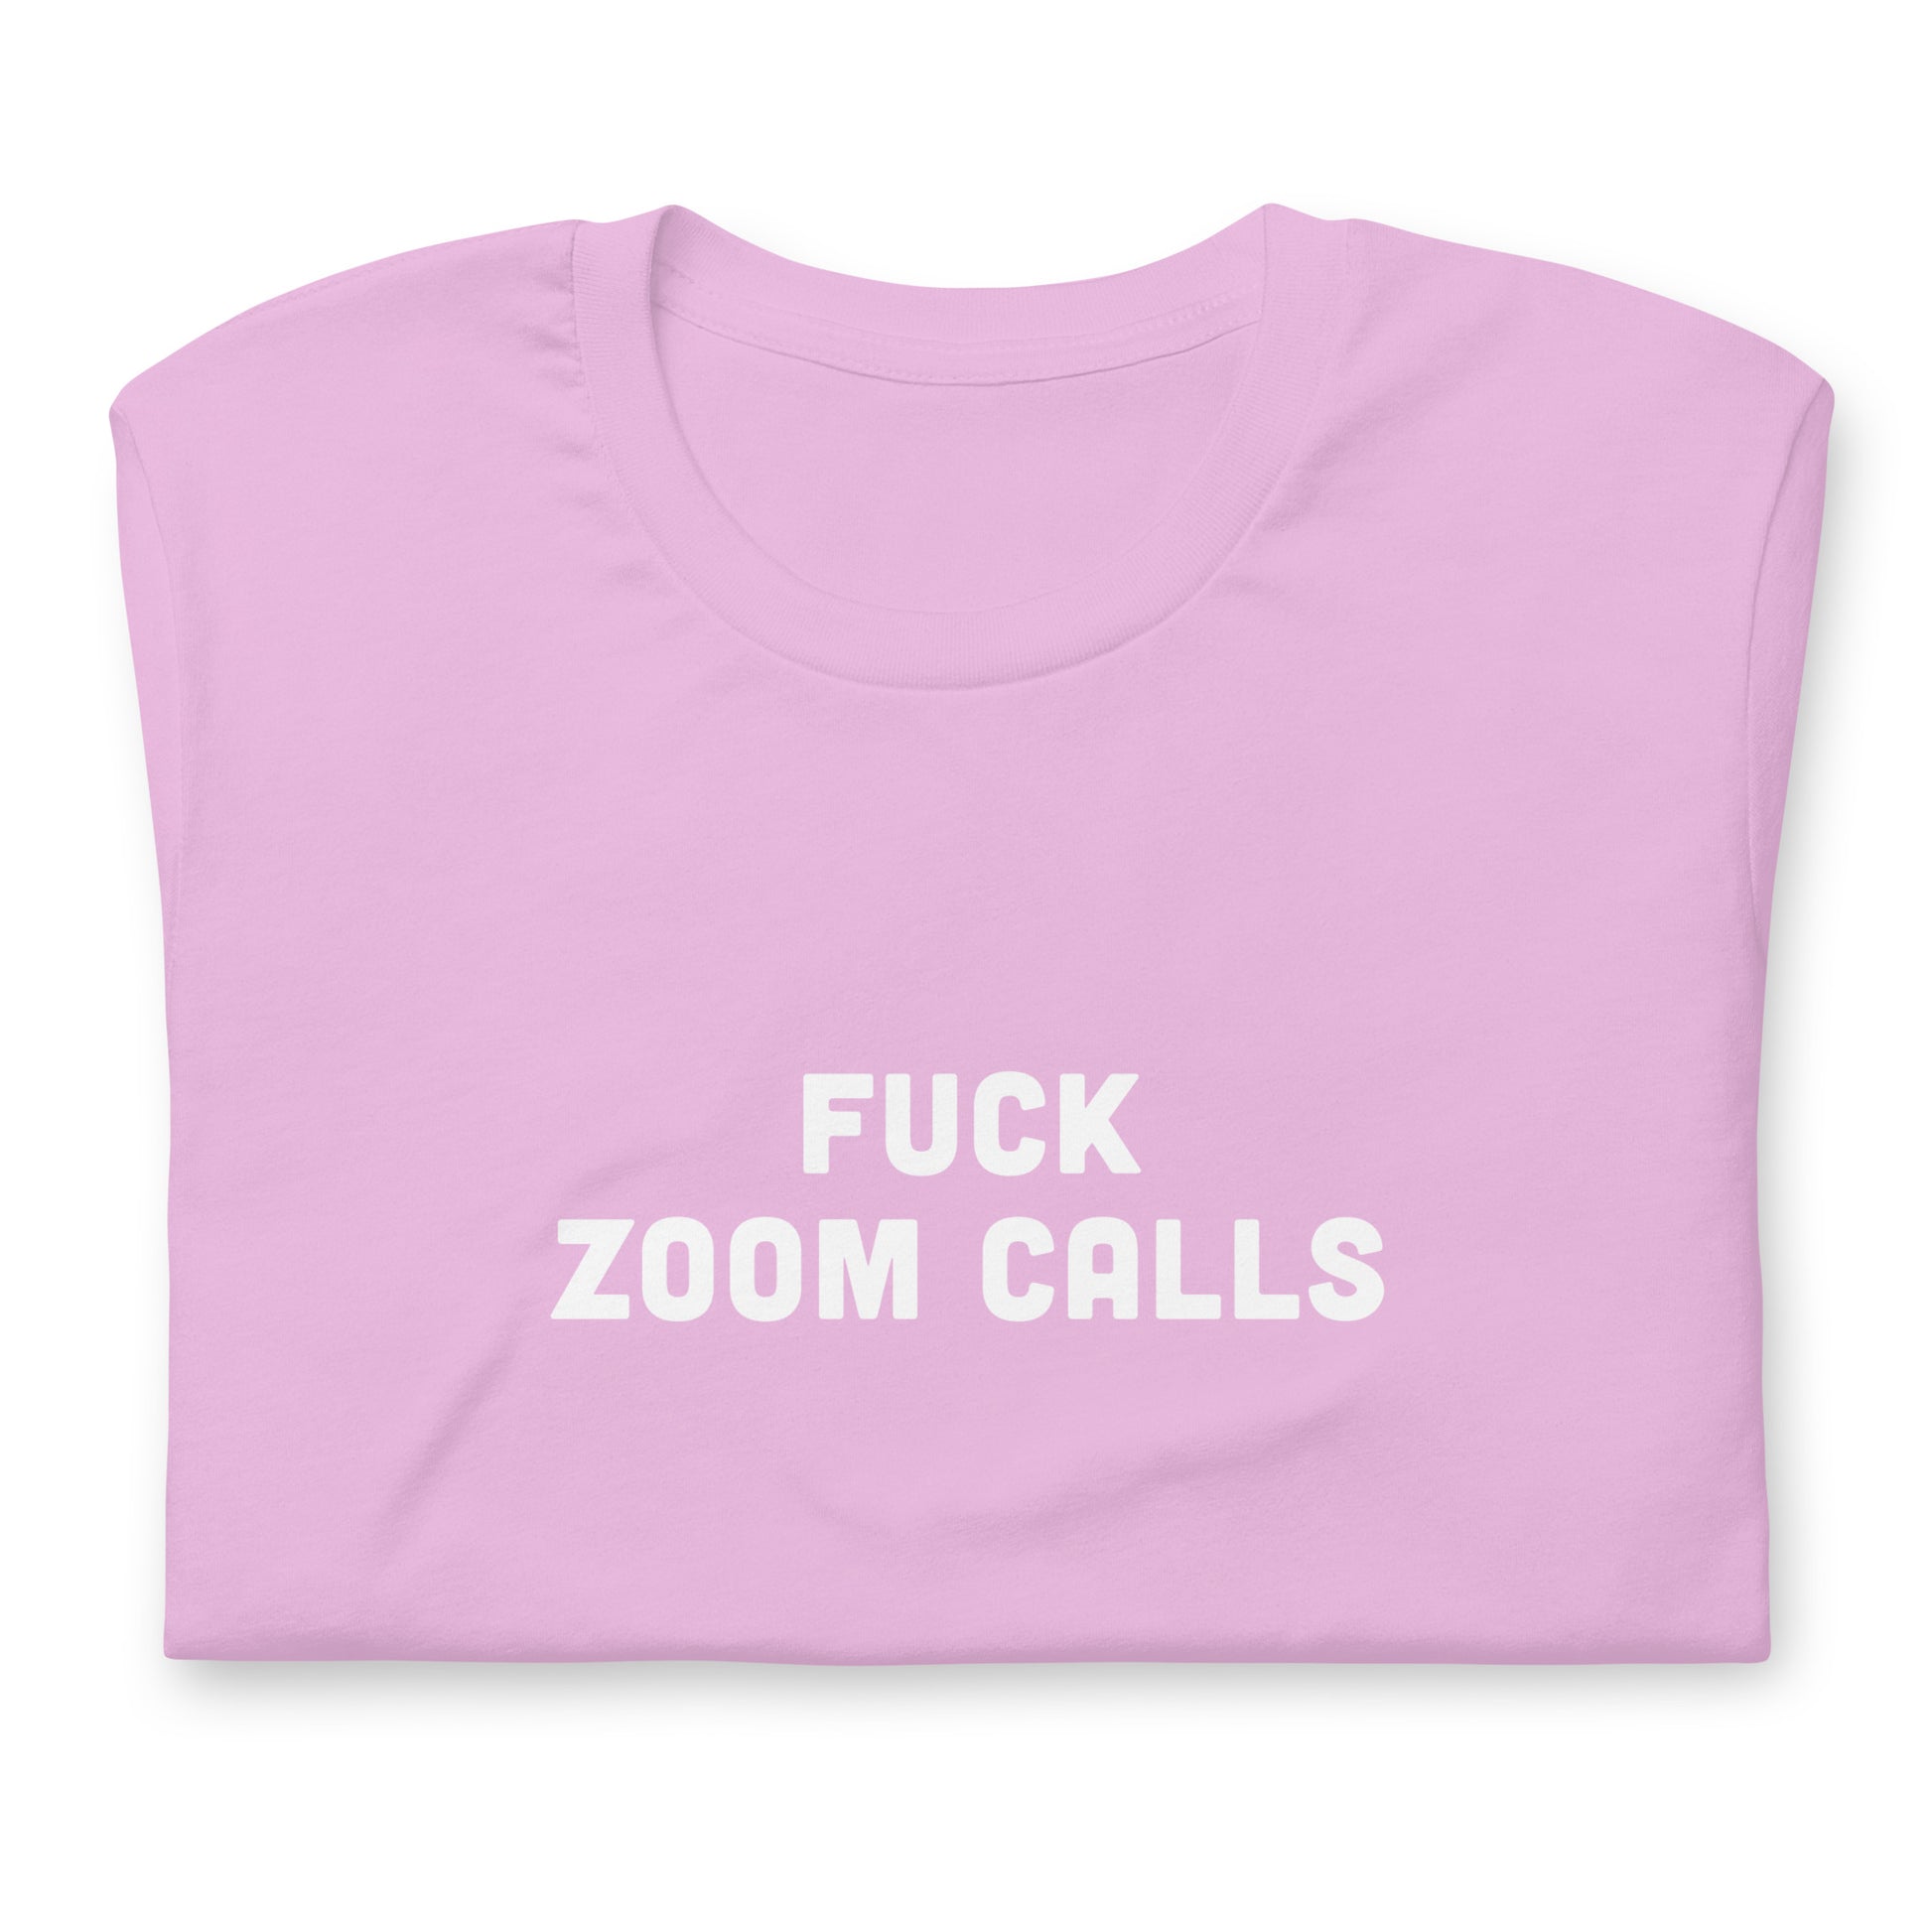 Fuck Zoom Calls T-Shirt Size 2XL Color Forest